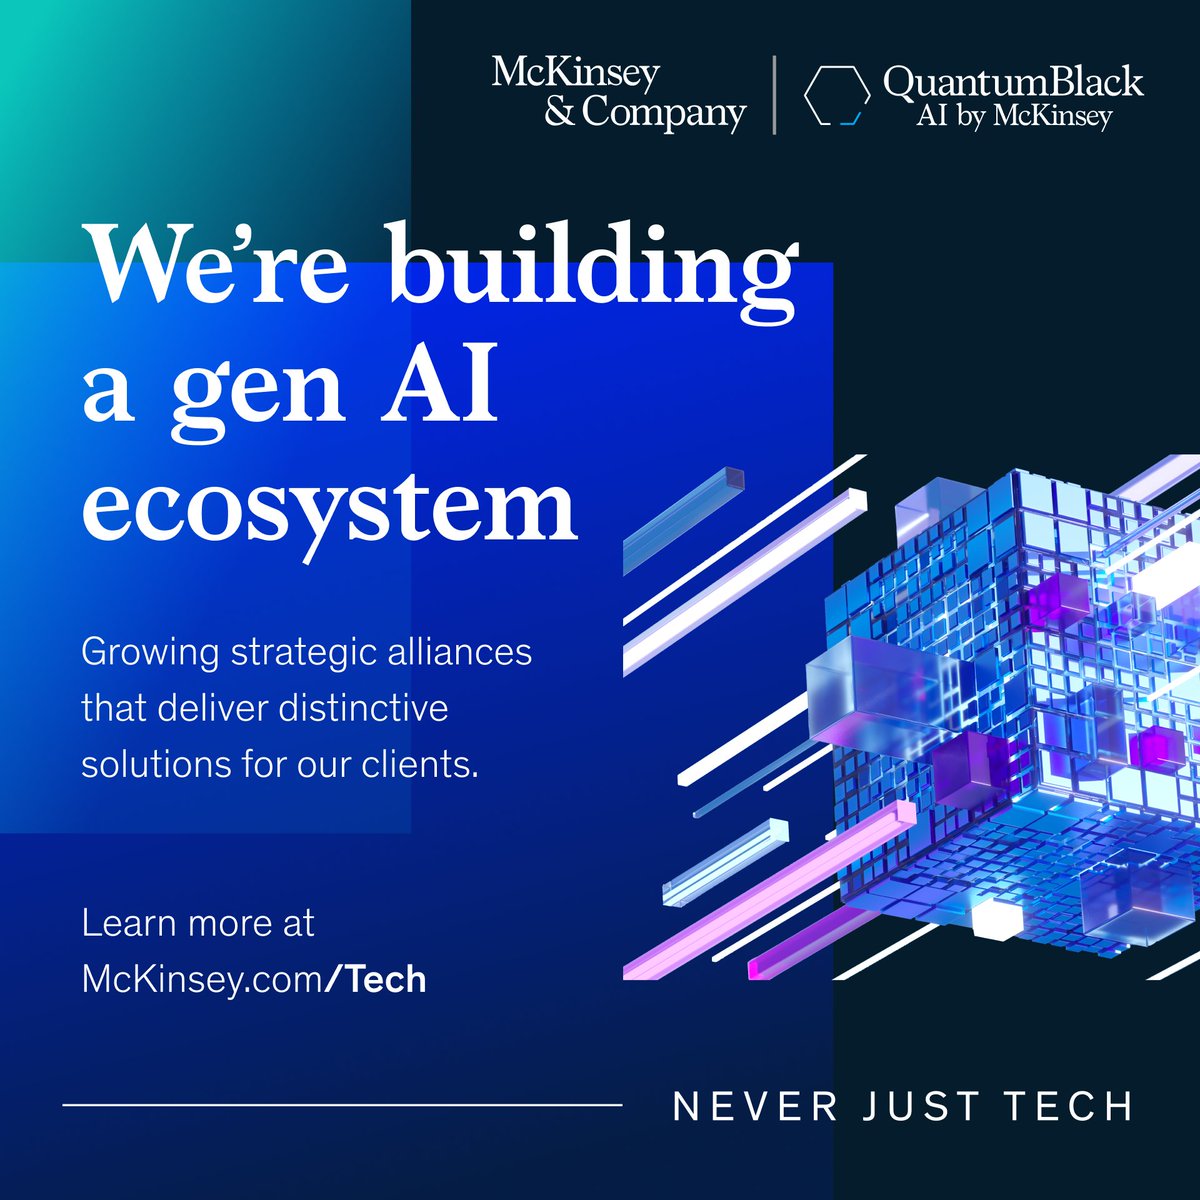 About 90% of gen AI pilots fail to reach full production. Companies will need trusted collaborators to successfully implement it at scale. Explore our cutting-edge ecosystem of strategic alliances, featuring global innovation leaders in tech and talent. mck.co/3TJtX8f